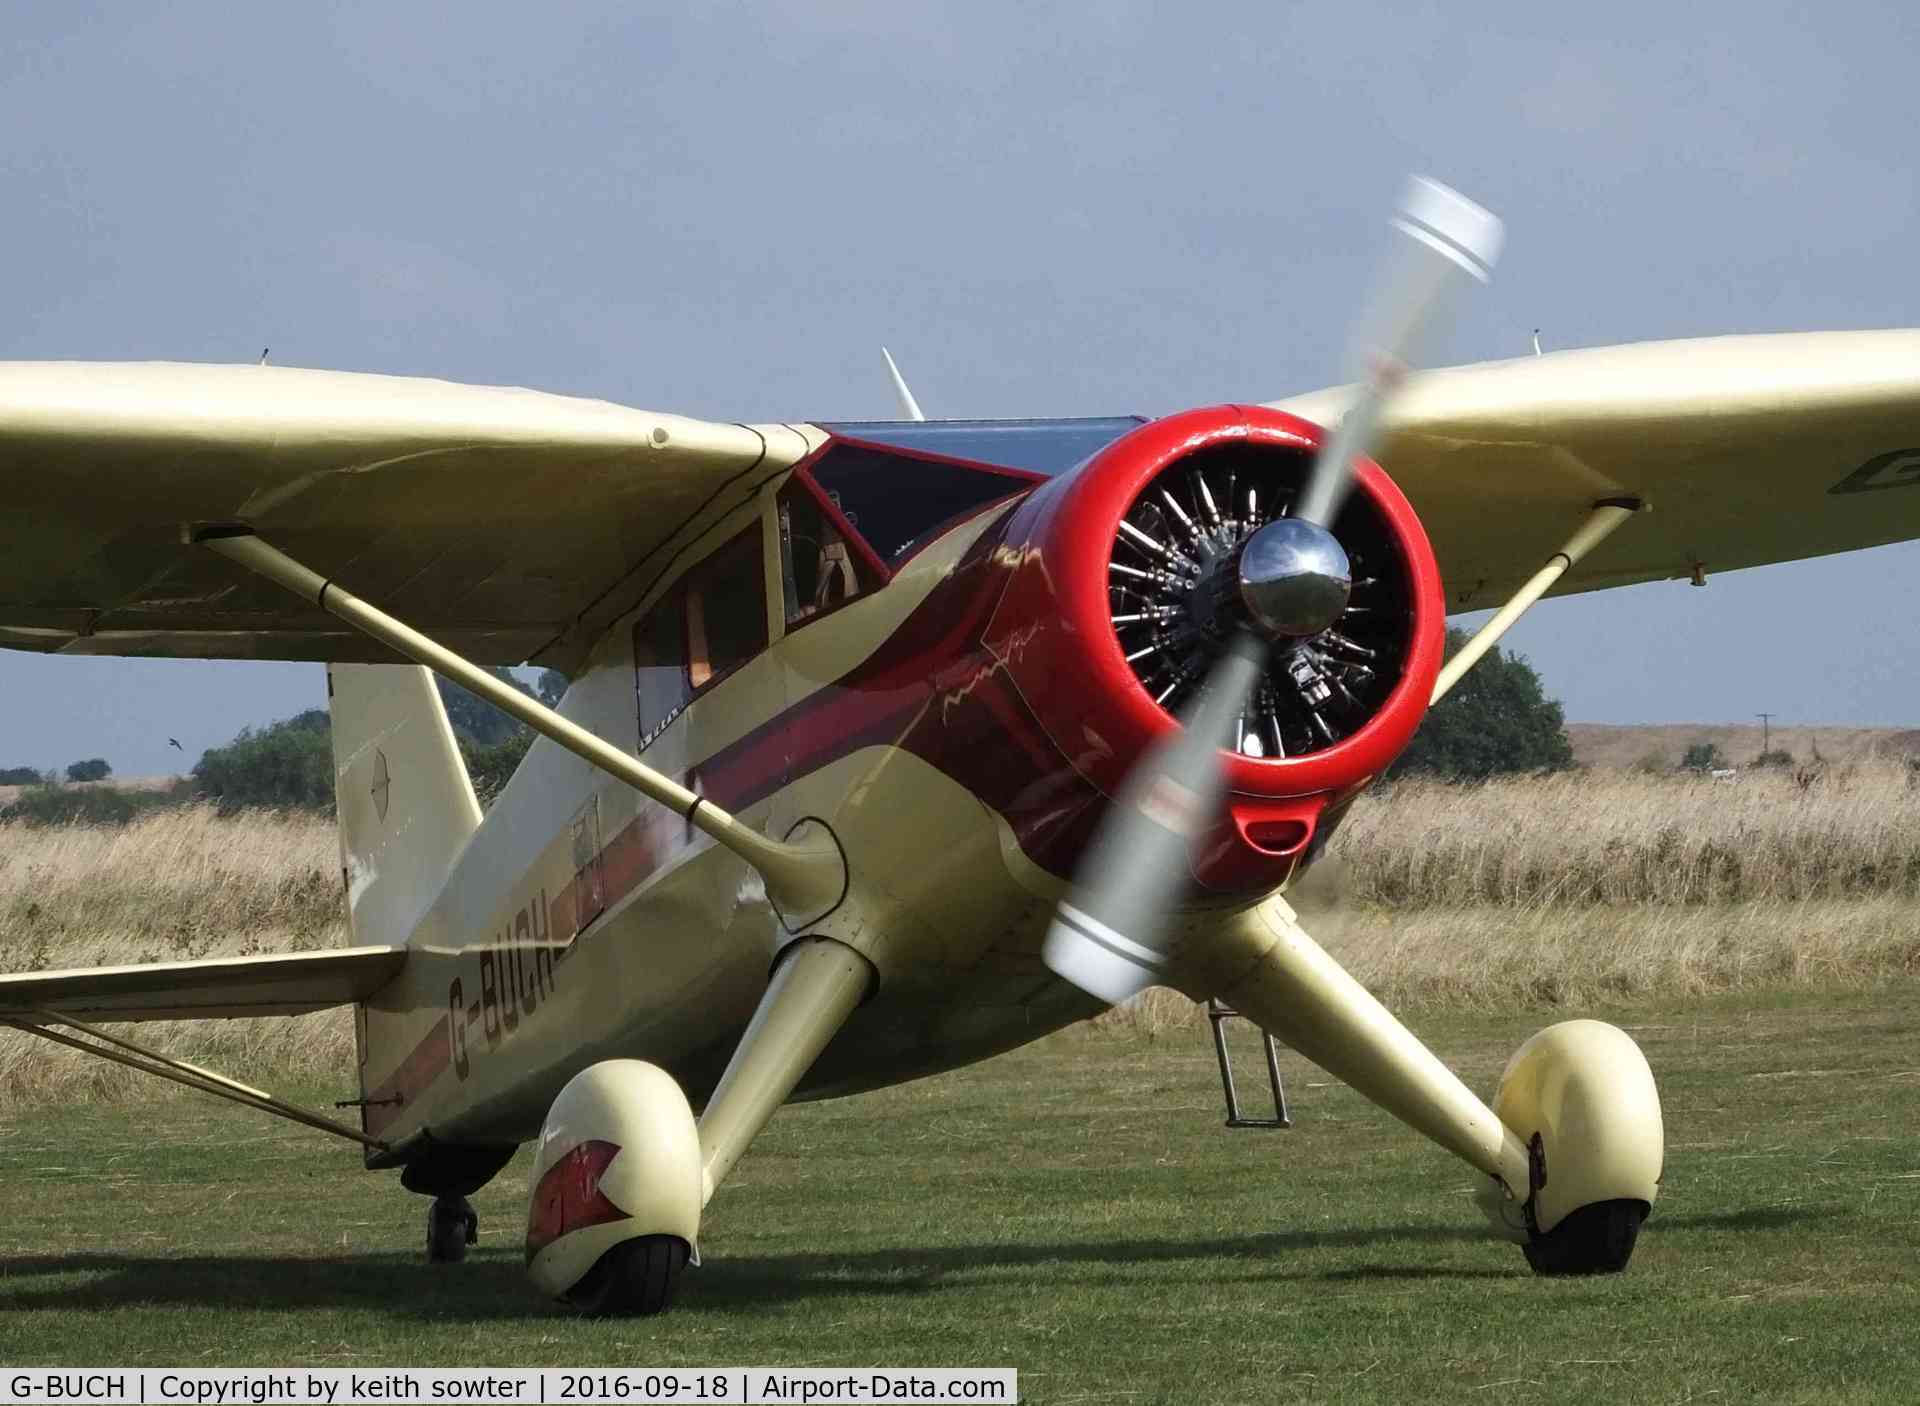 G-BUCH, 1943 Stinson V77 (AT-19) Reliant C/N 77-381, At Stow Maries